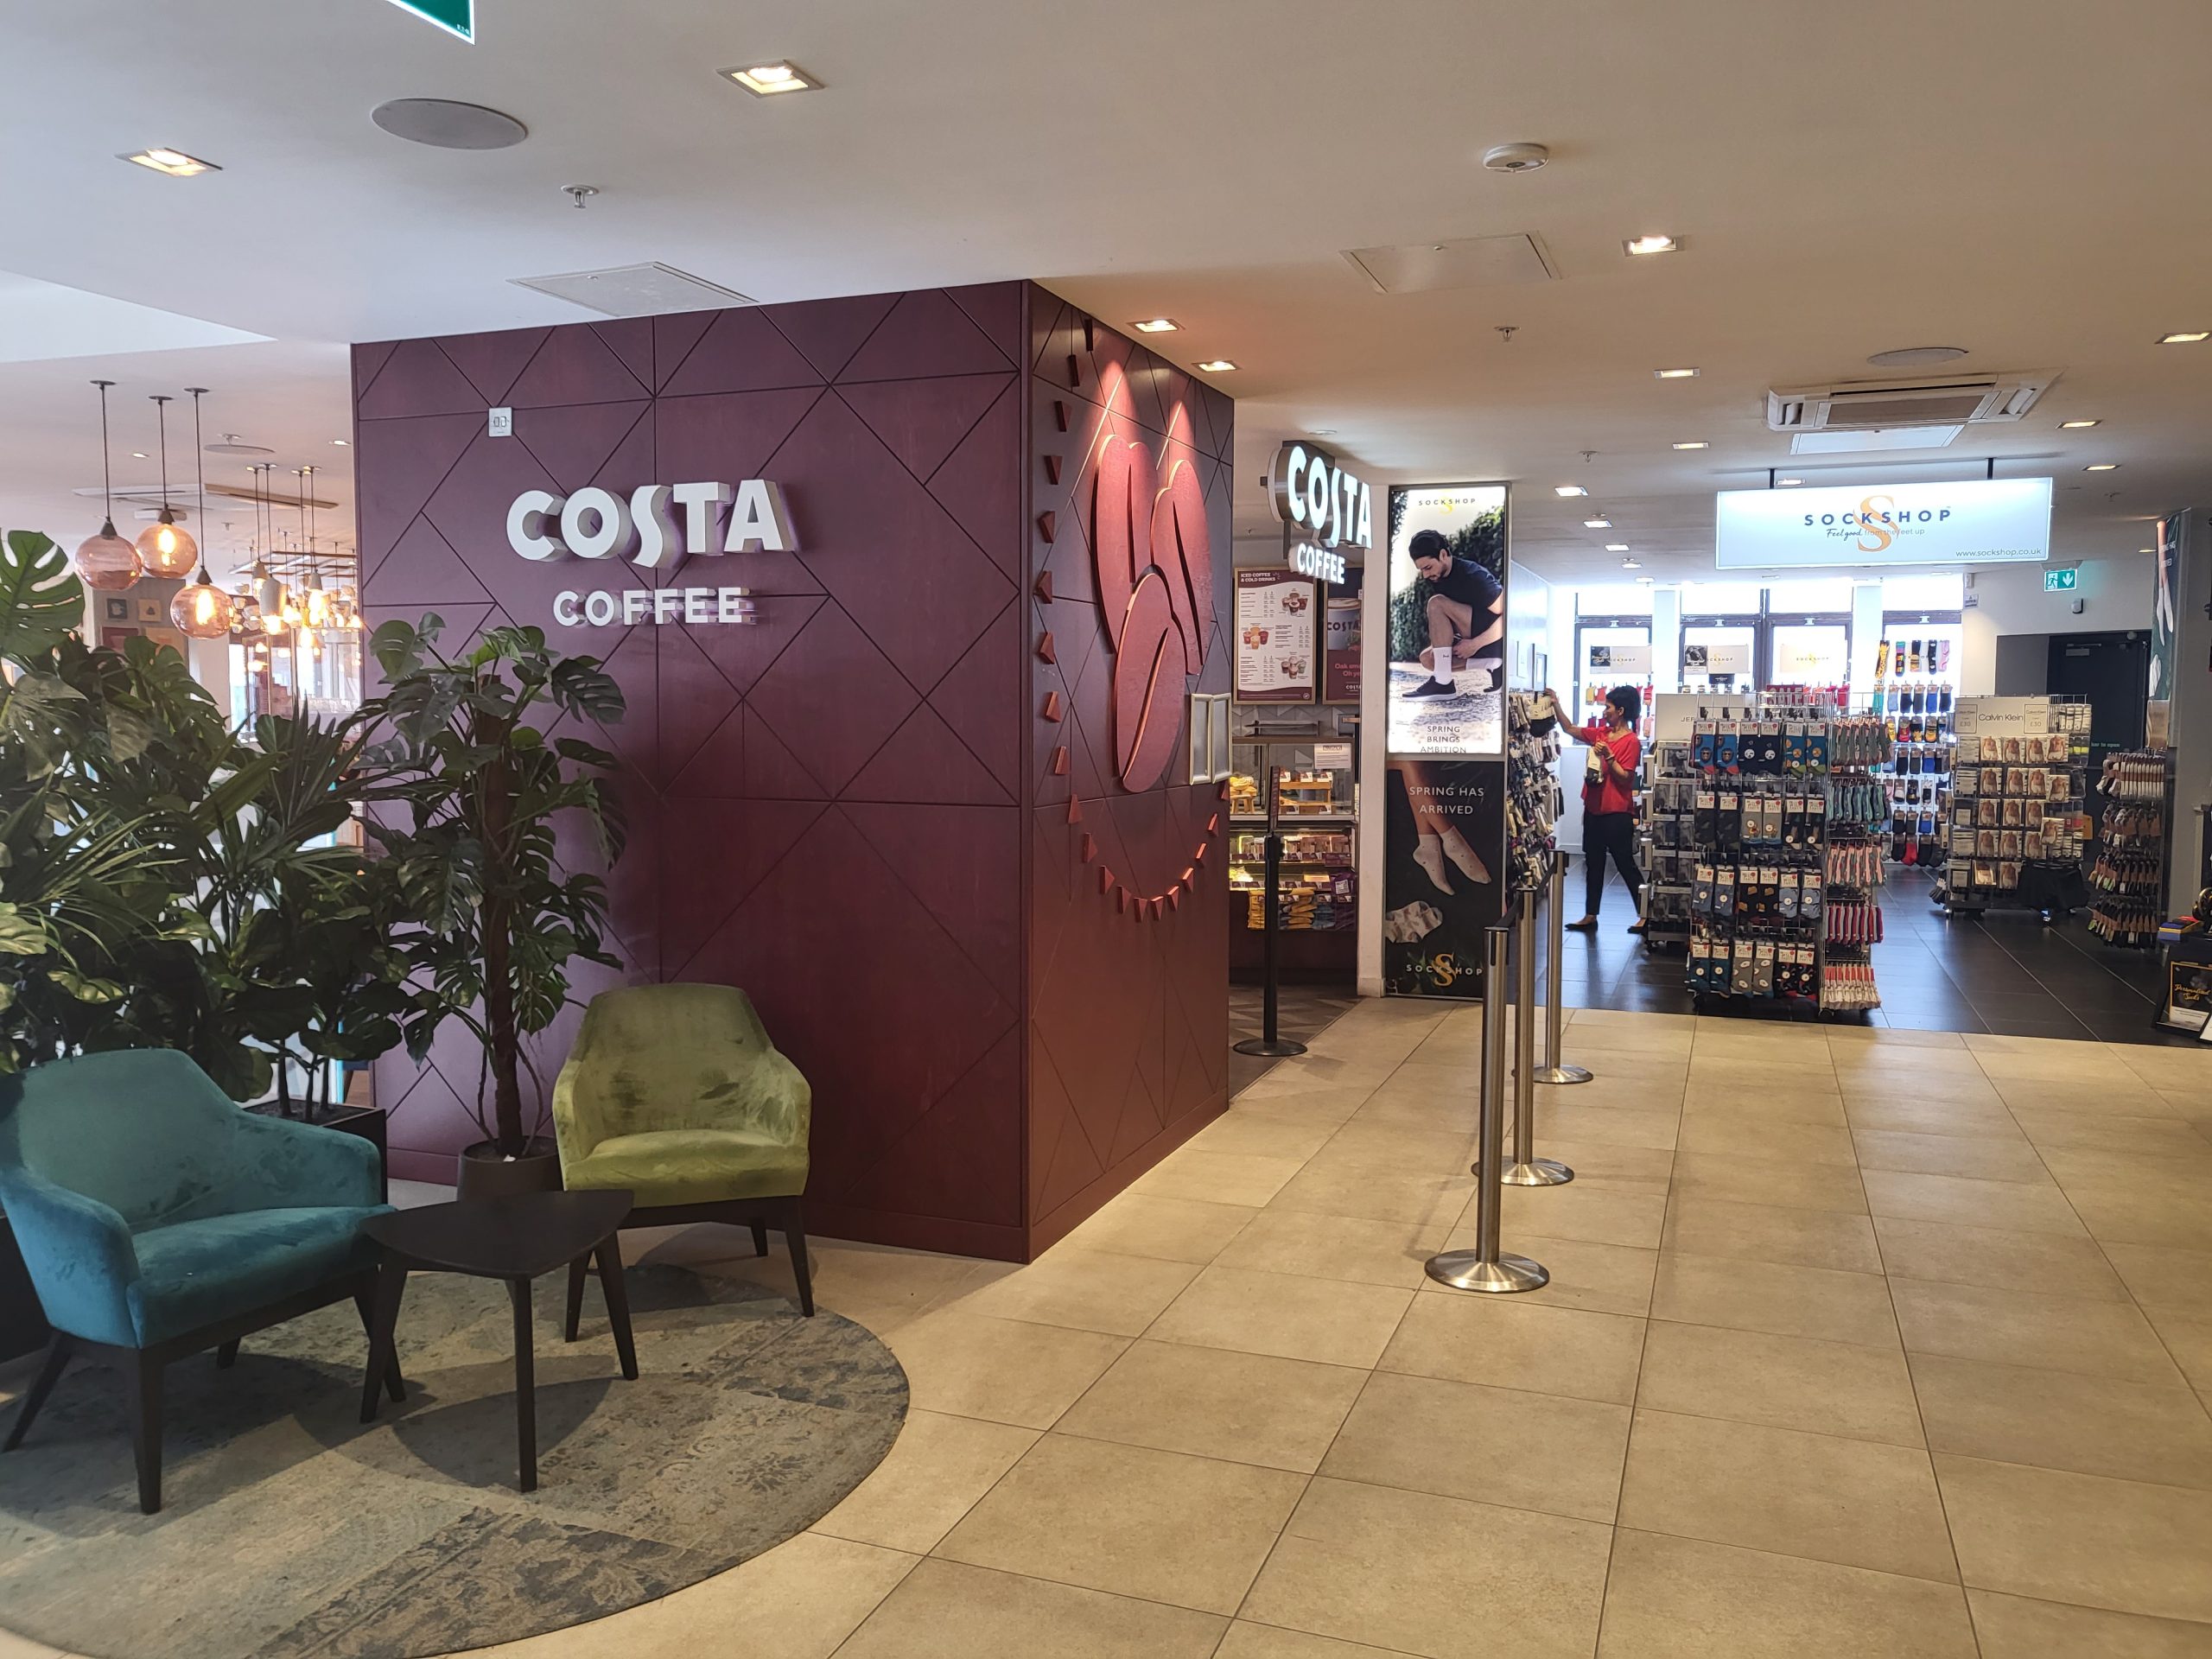 Costa and Sockshop are just two of the other concessions at Next Oxford Street